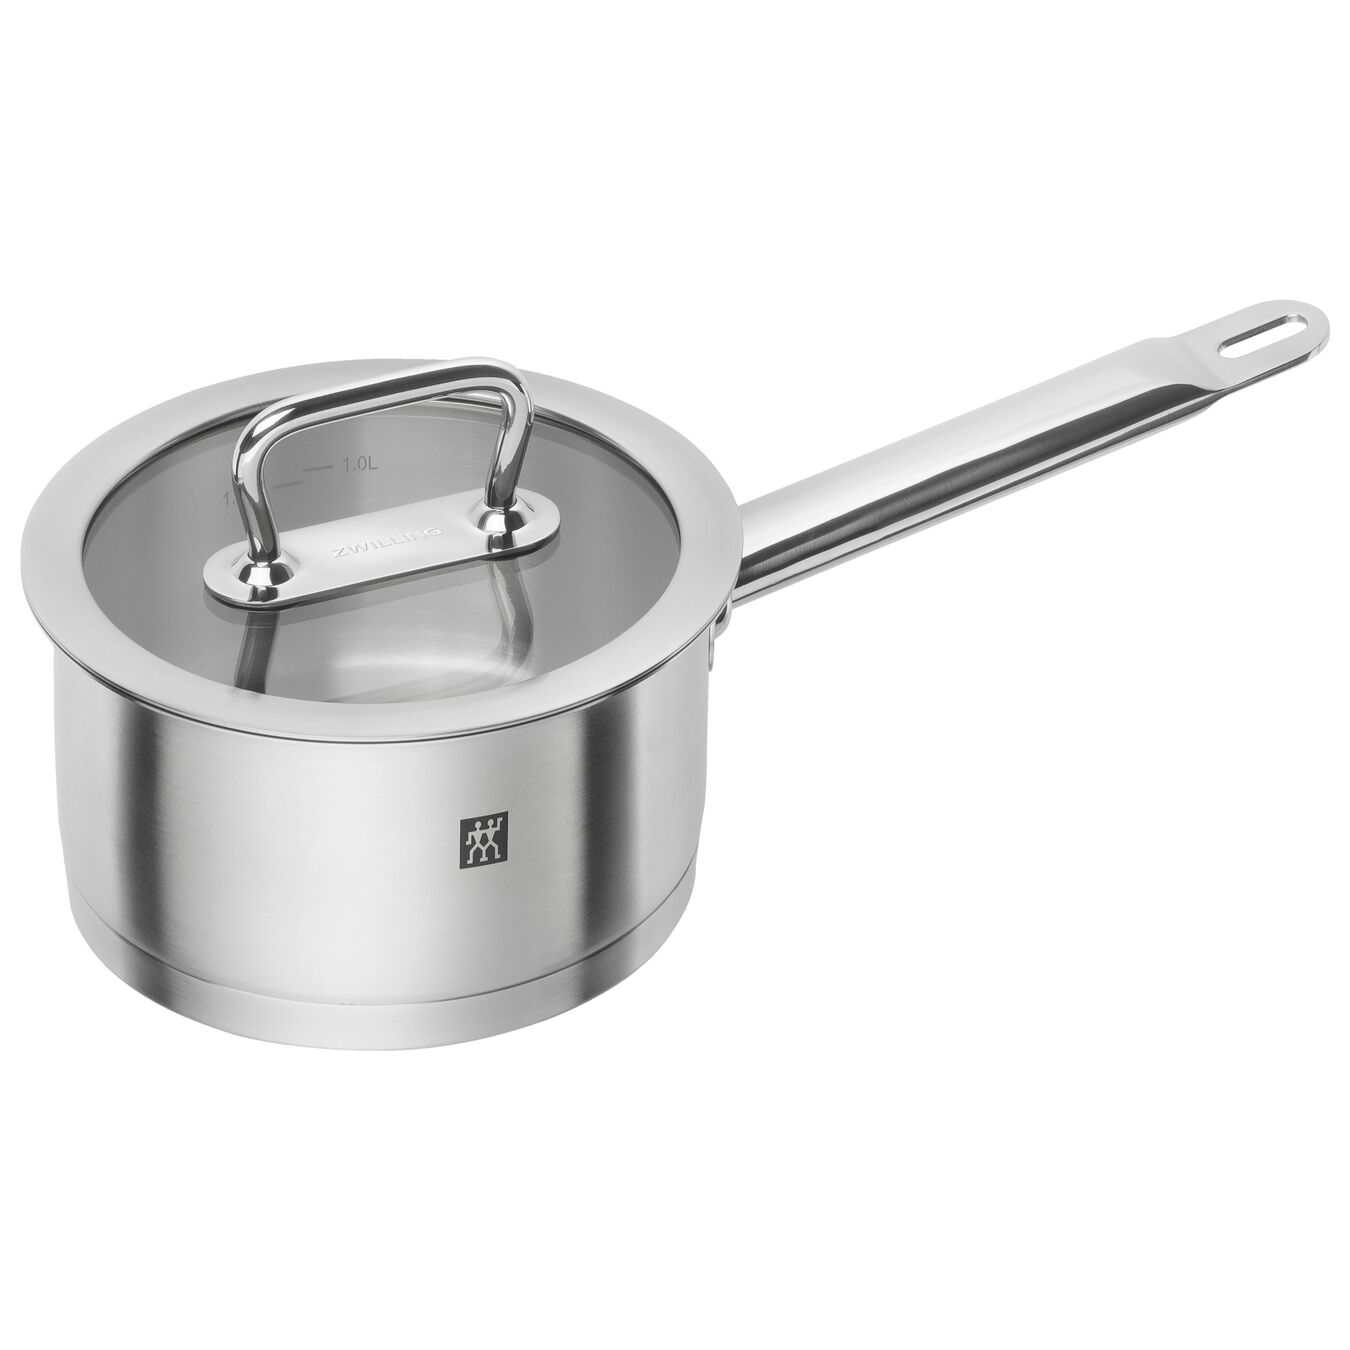 1.5 l 18/10 Stainless Steel round Sauce pan, silver,,large 1